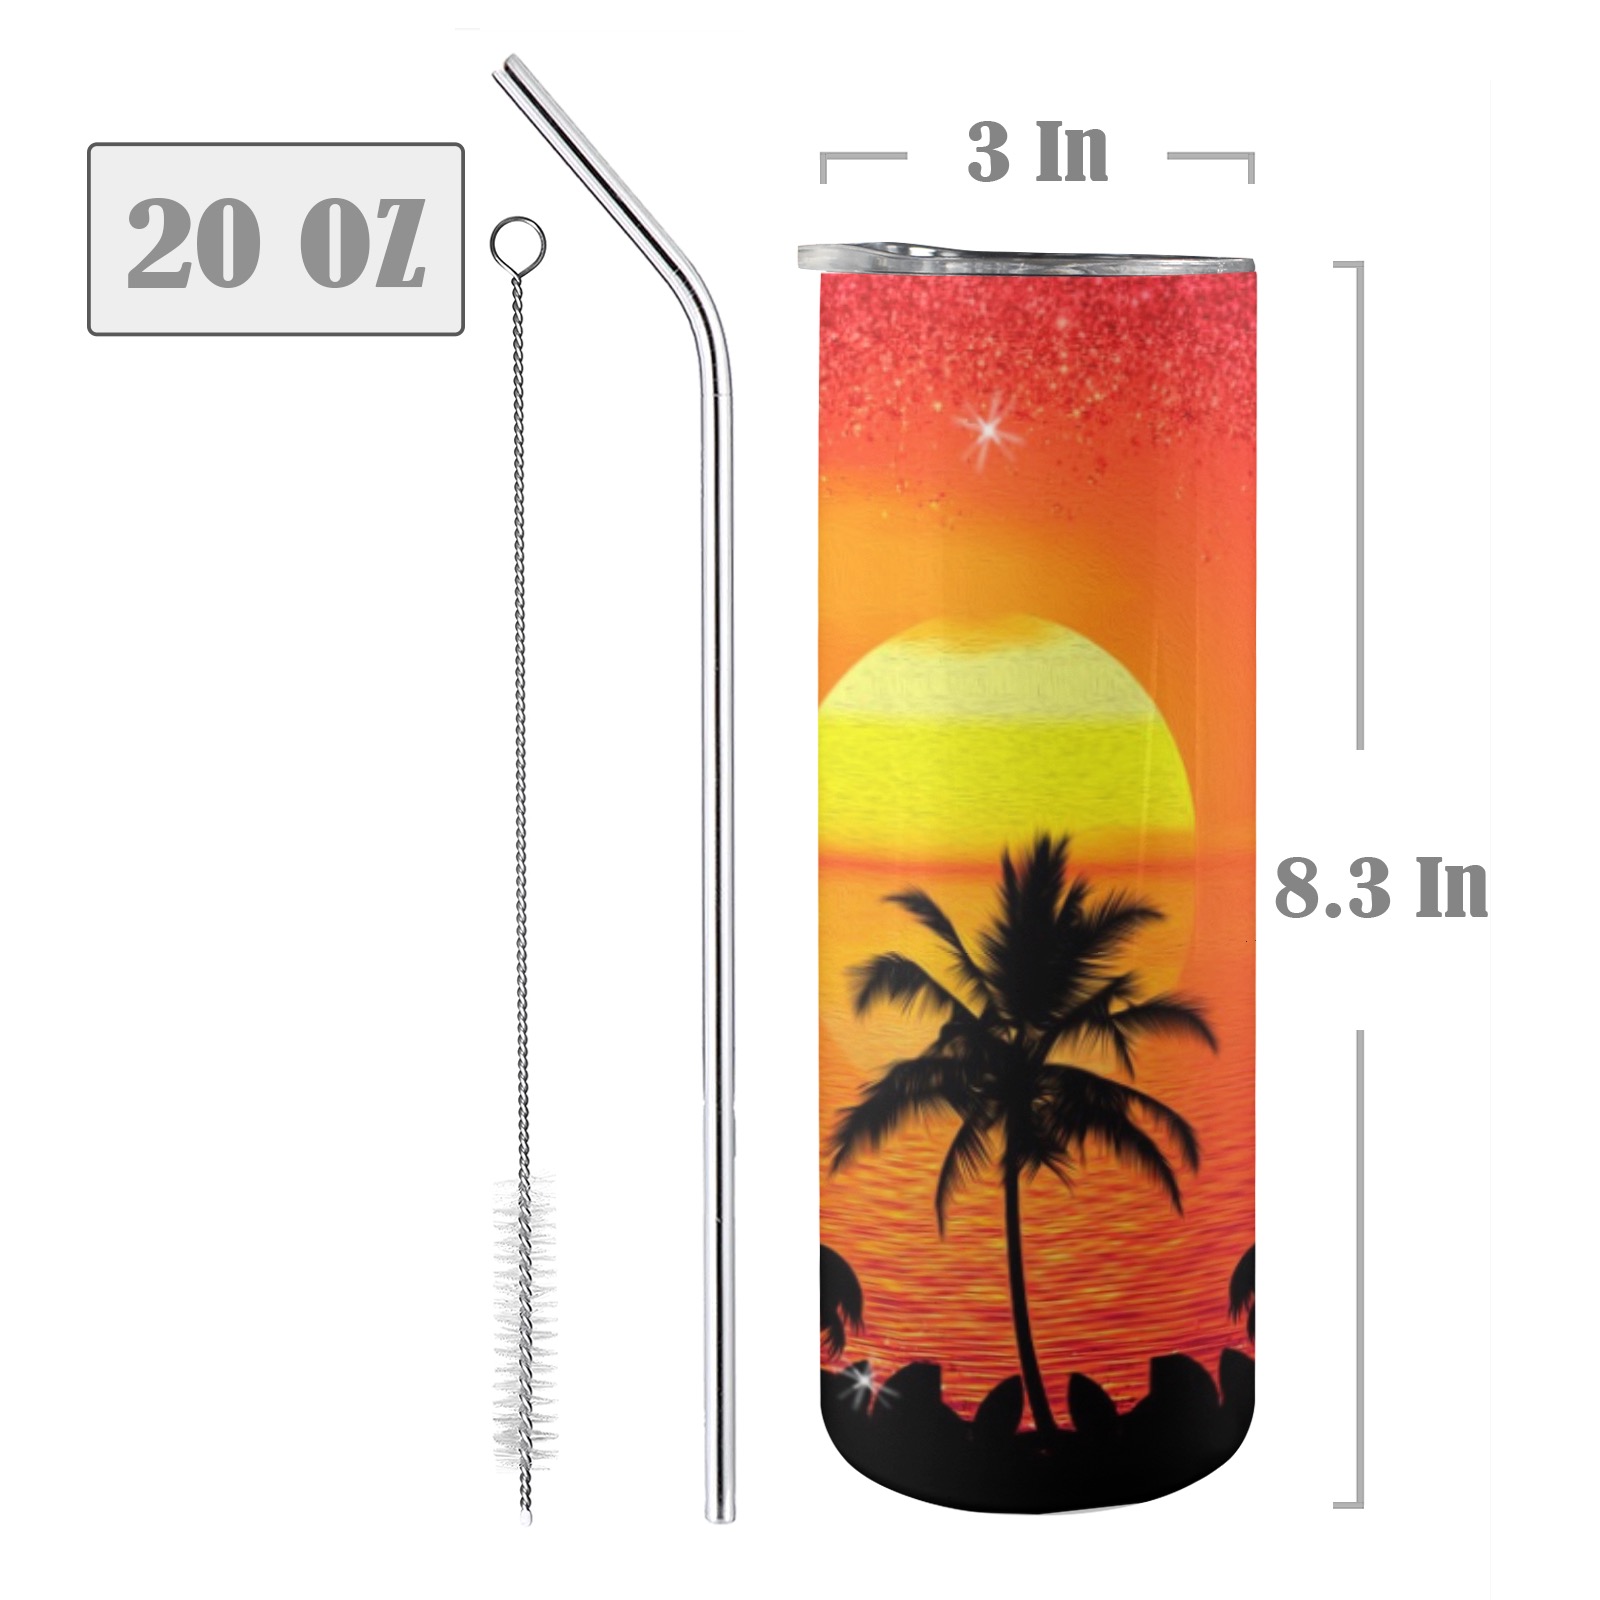 Sunset Beach 20oz Tall Skinny Tumbler with Lid and Straw